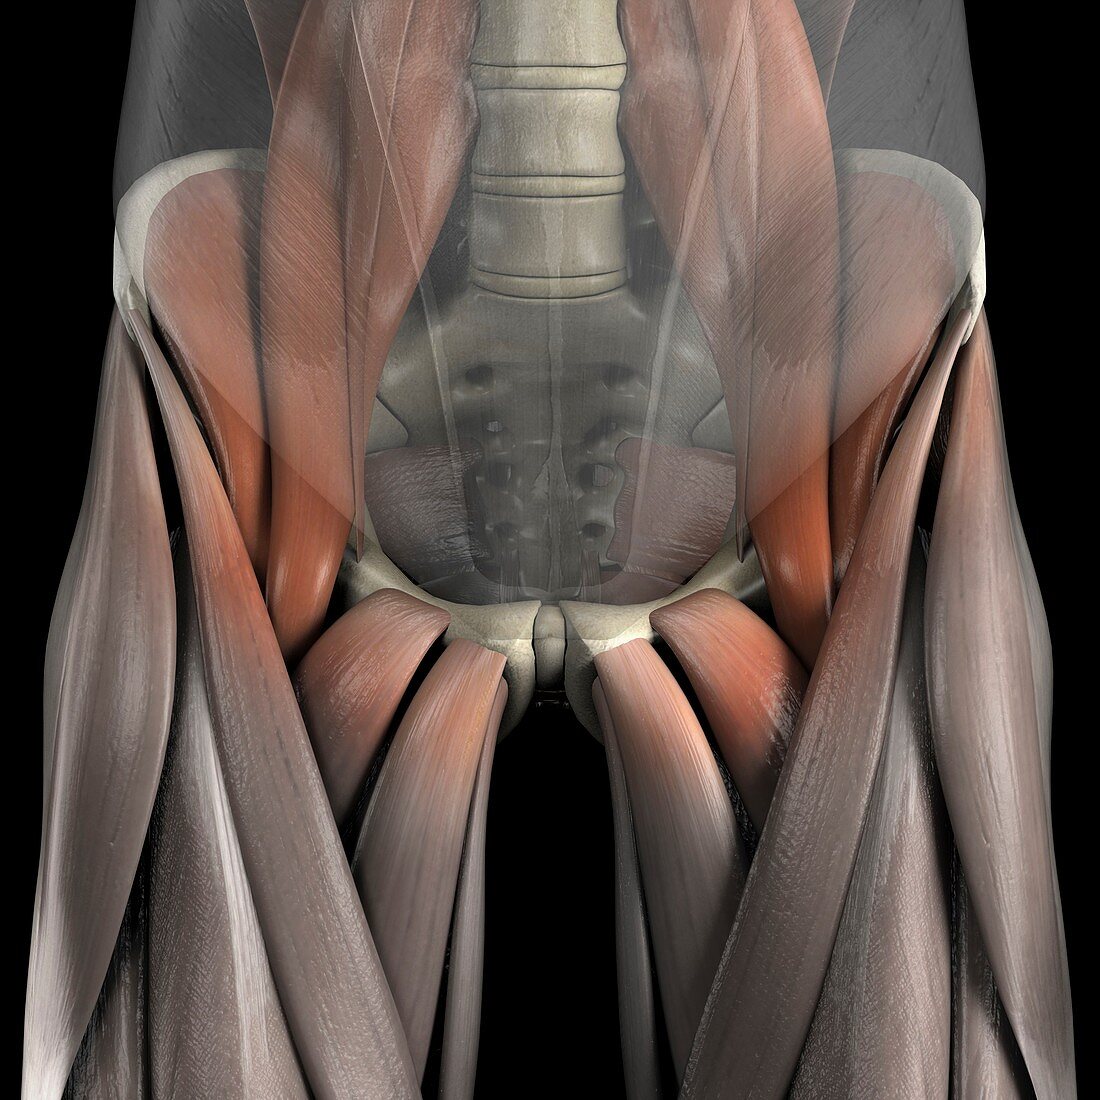 The Psoas Muscles, artwork